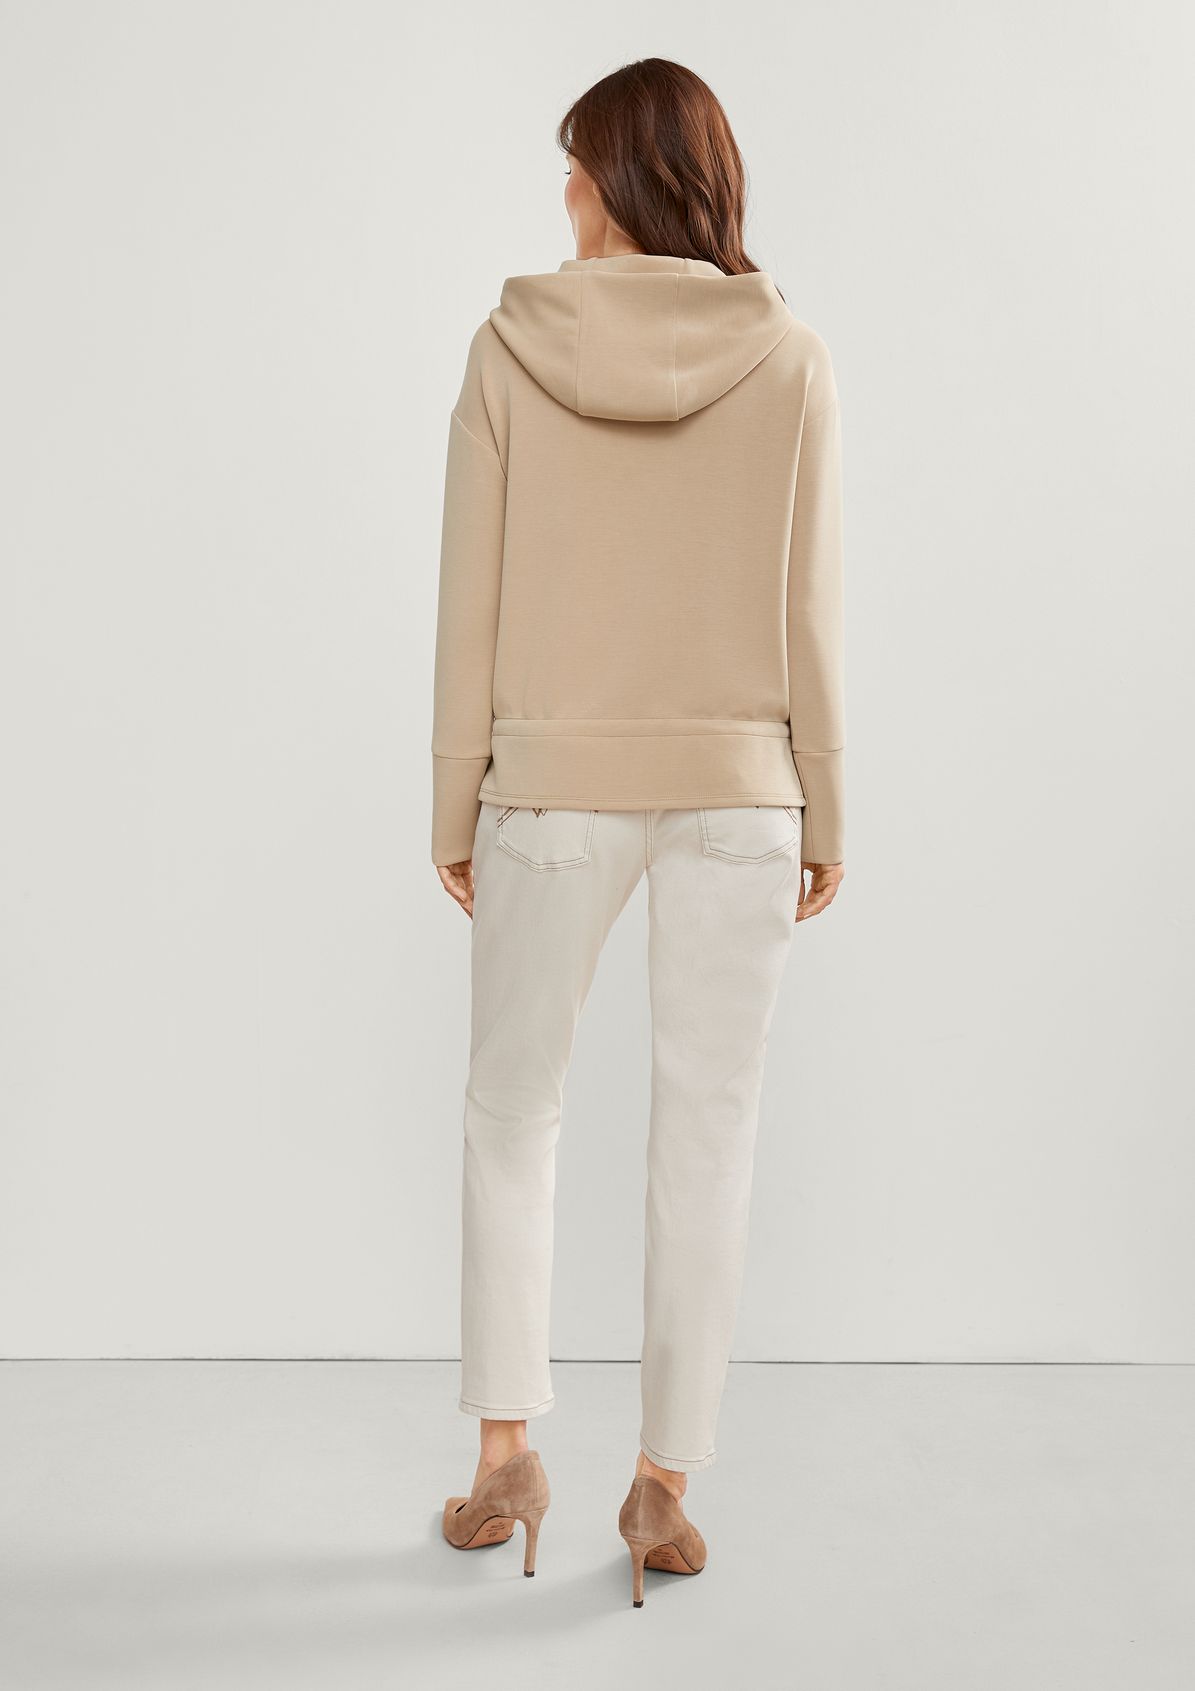 Sweatshirt with drawstring from comma